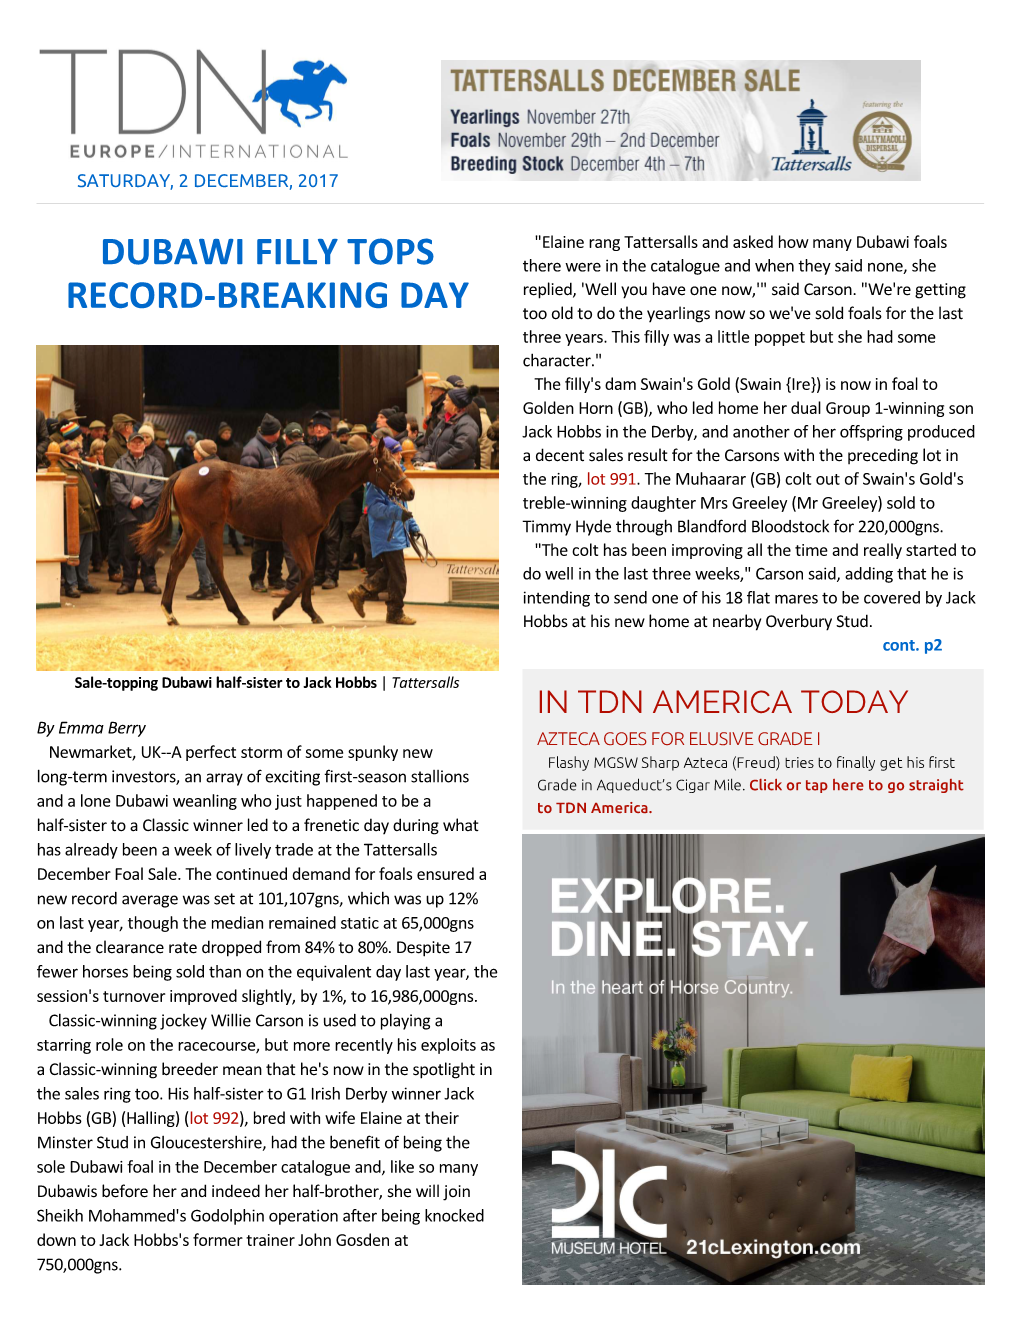 Dubawi Filly Tops Record-Breaking Day Cont